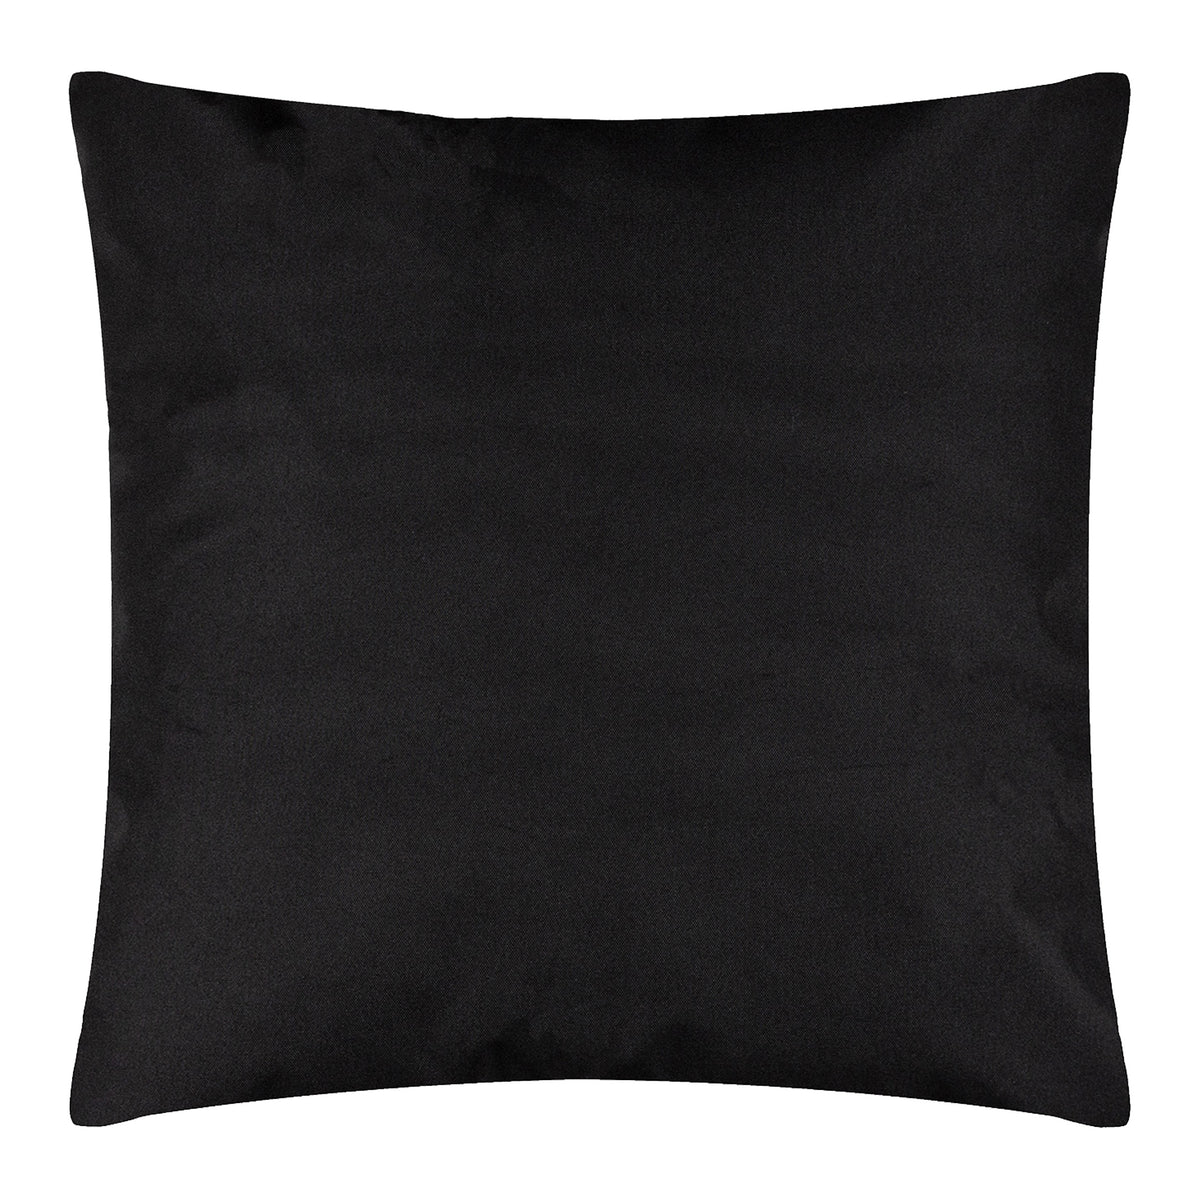 Wrap Black 43X43 Outdoor Polyester Cushion 2 Pack